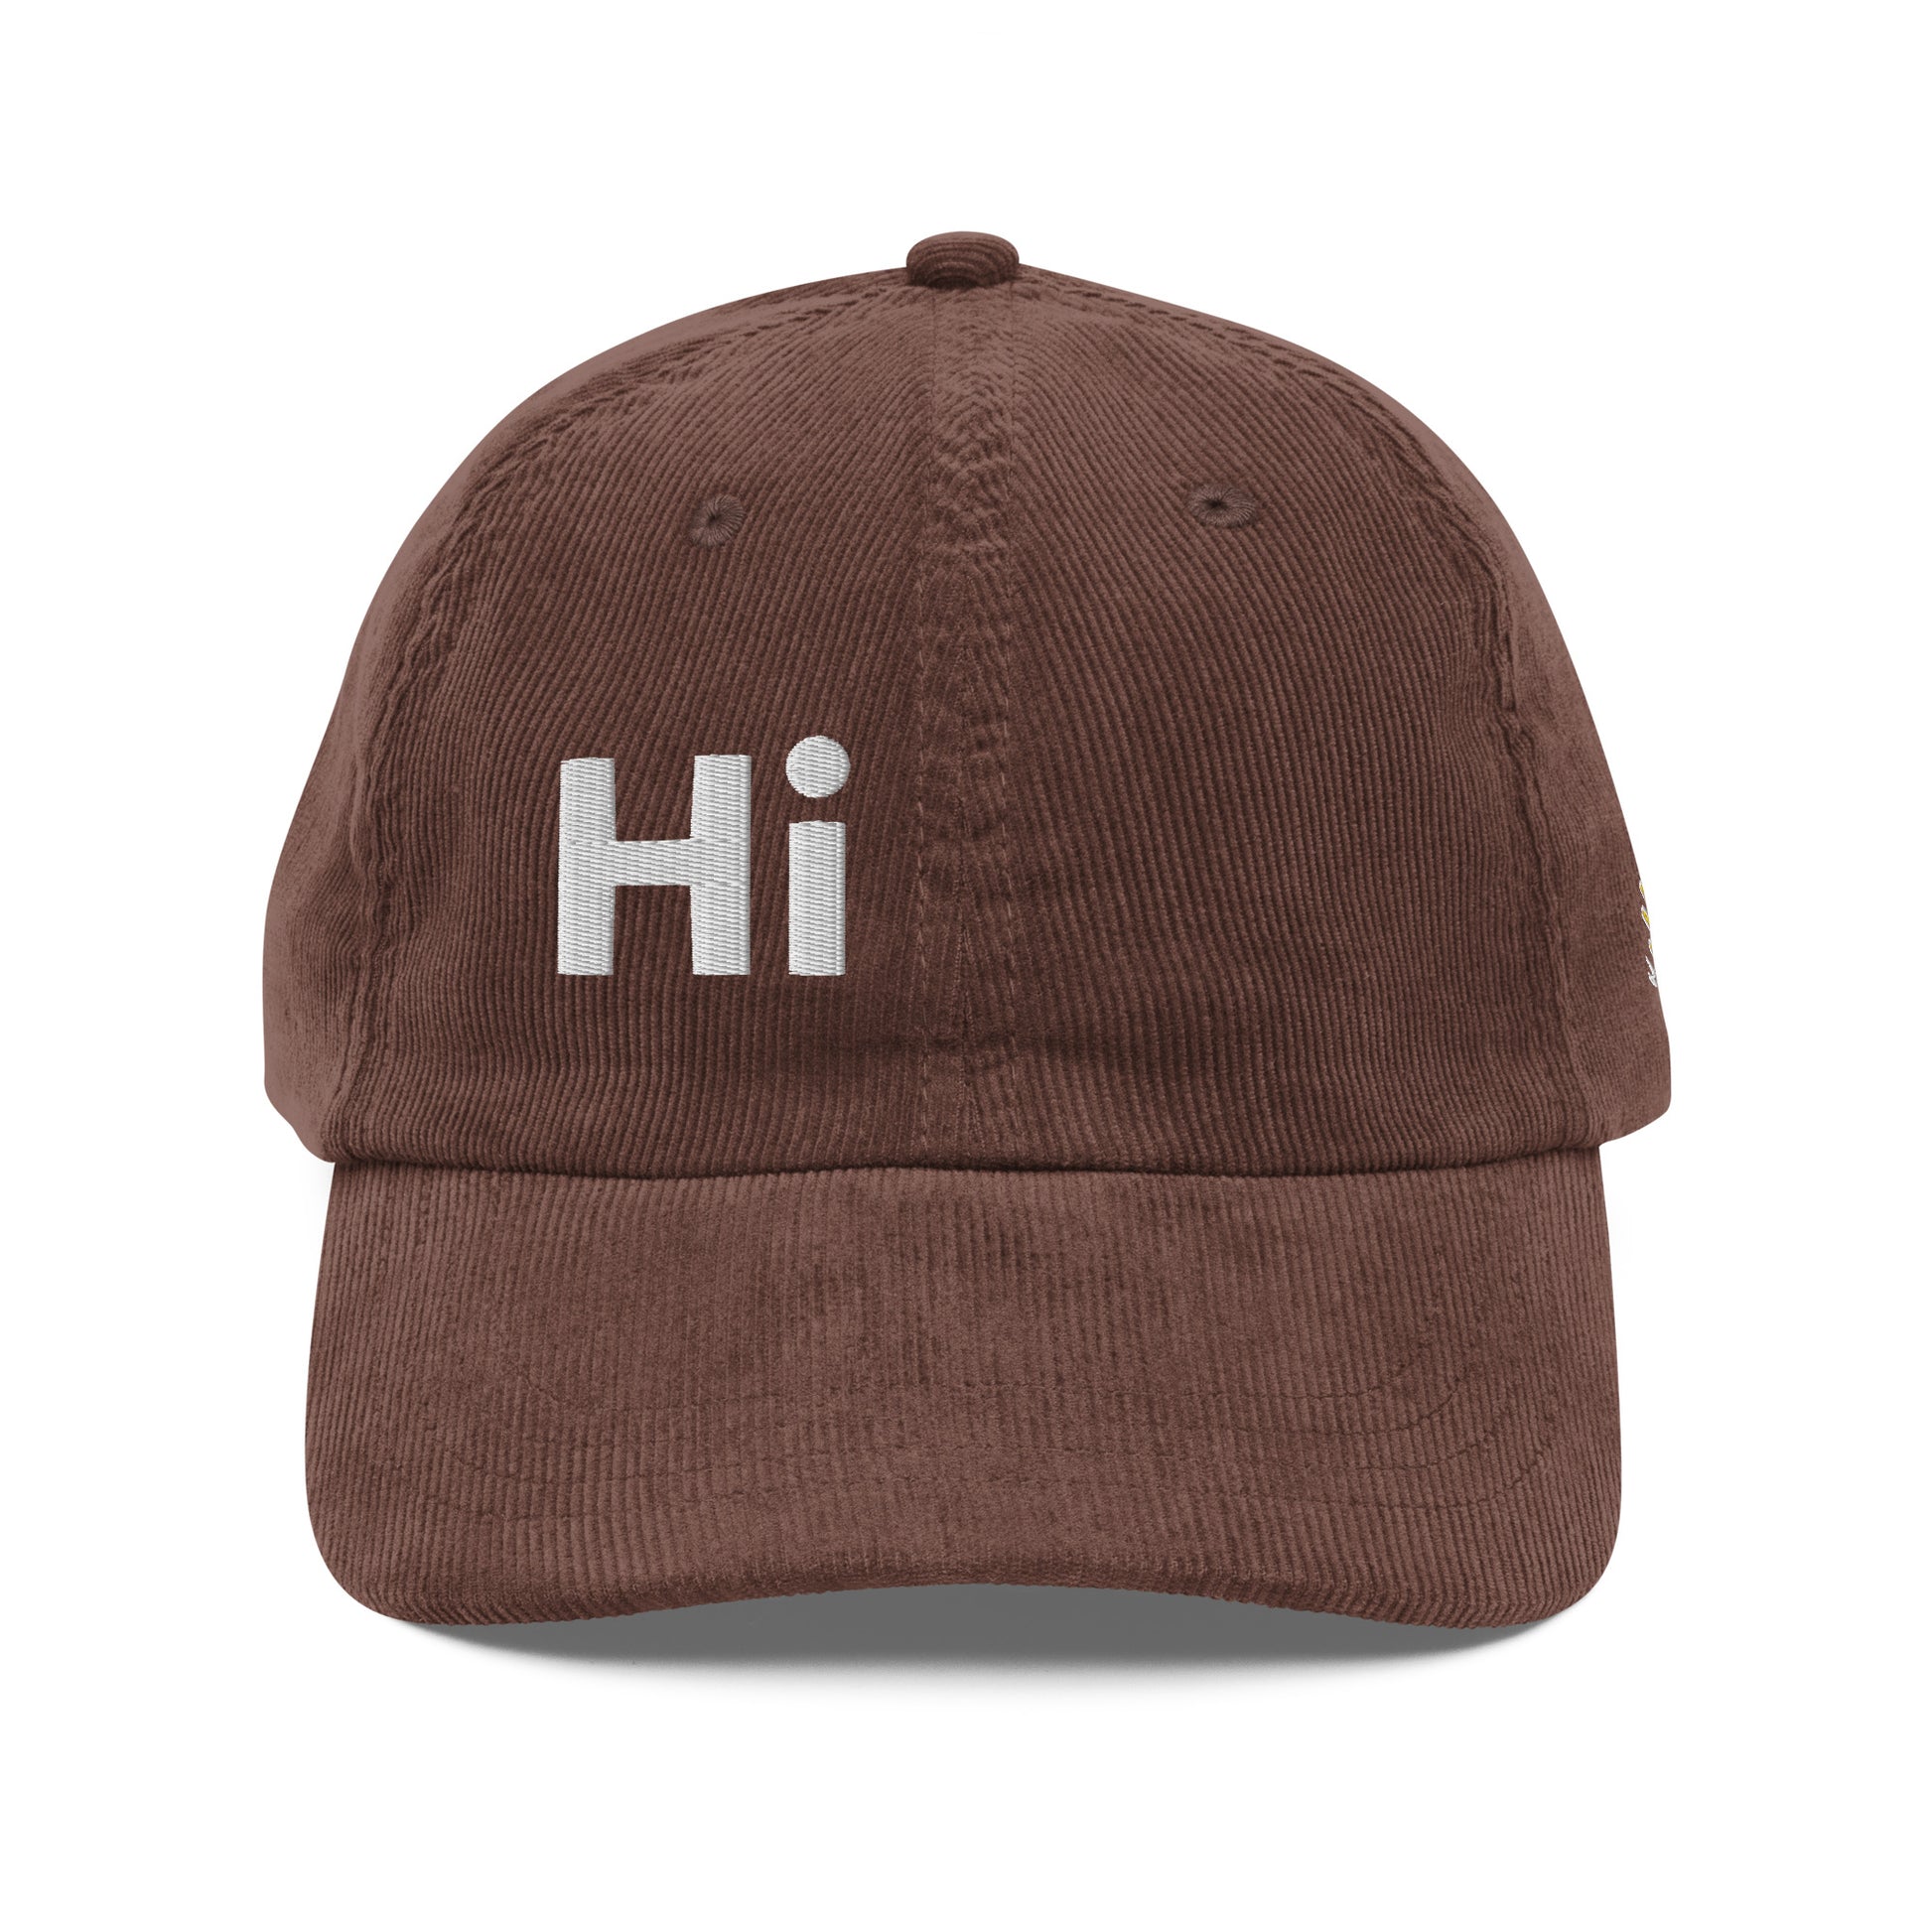 Hi Shalom Hebrew Corduroy Hat by Happy interactions in Brown